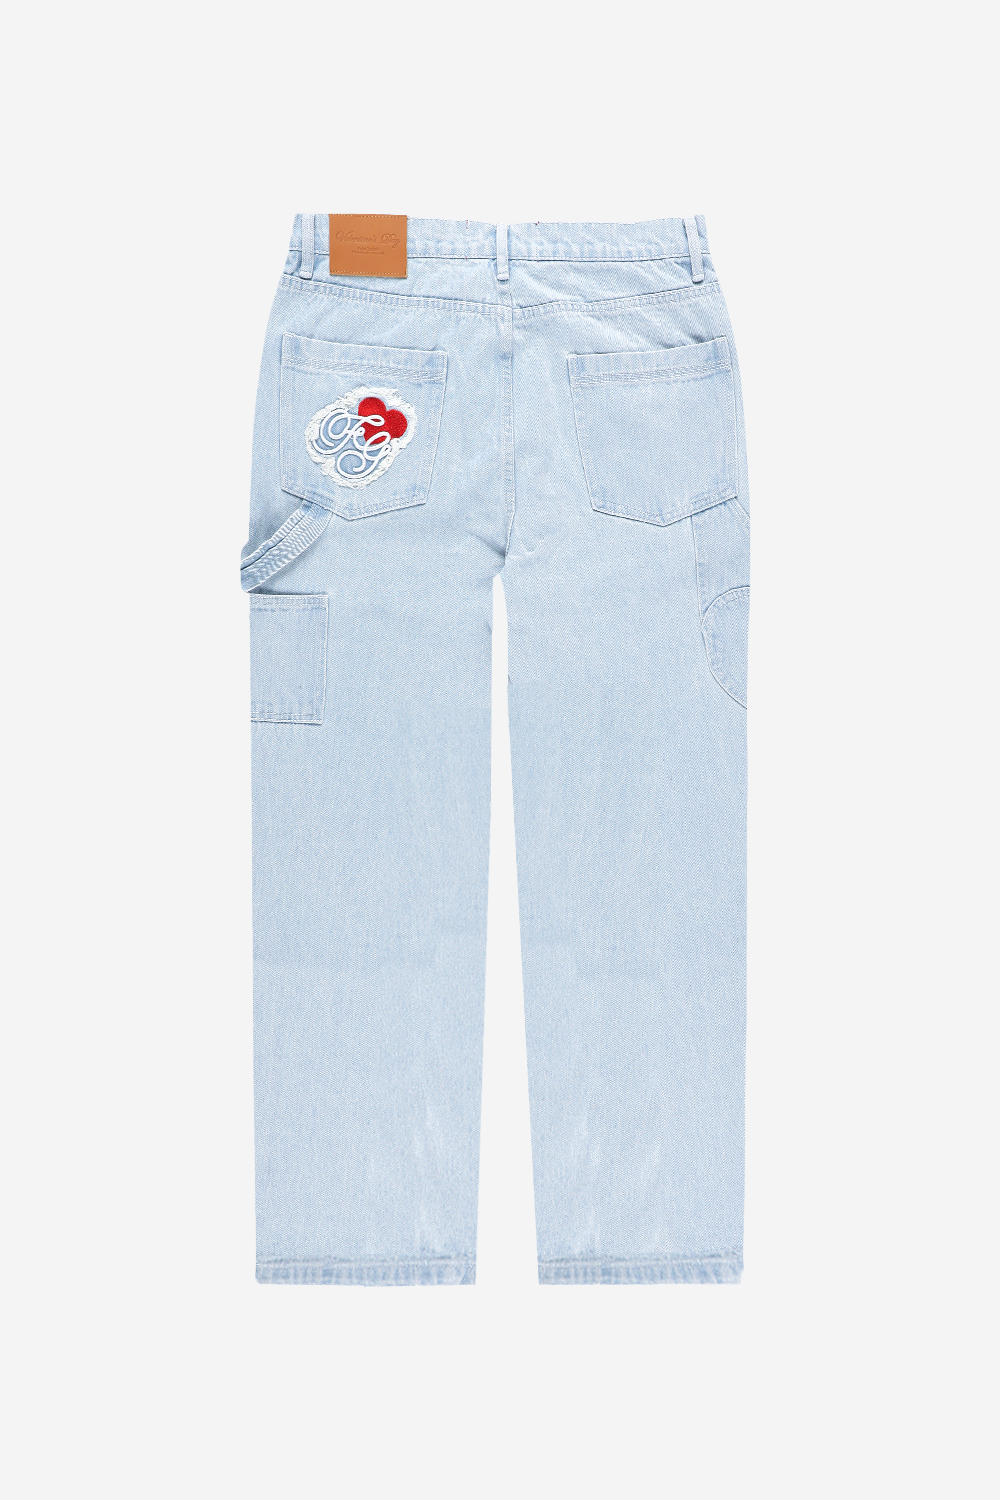 STRAIGHT TO THE HEART JEANS LIGHT BLUE